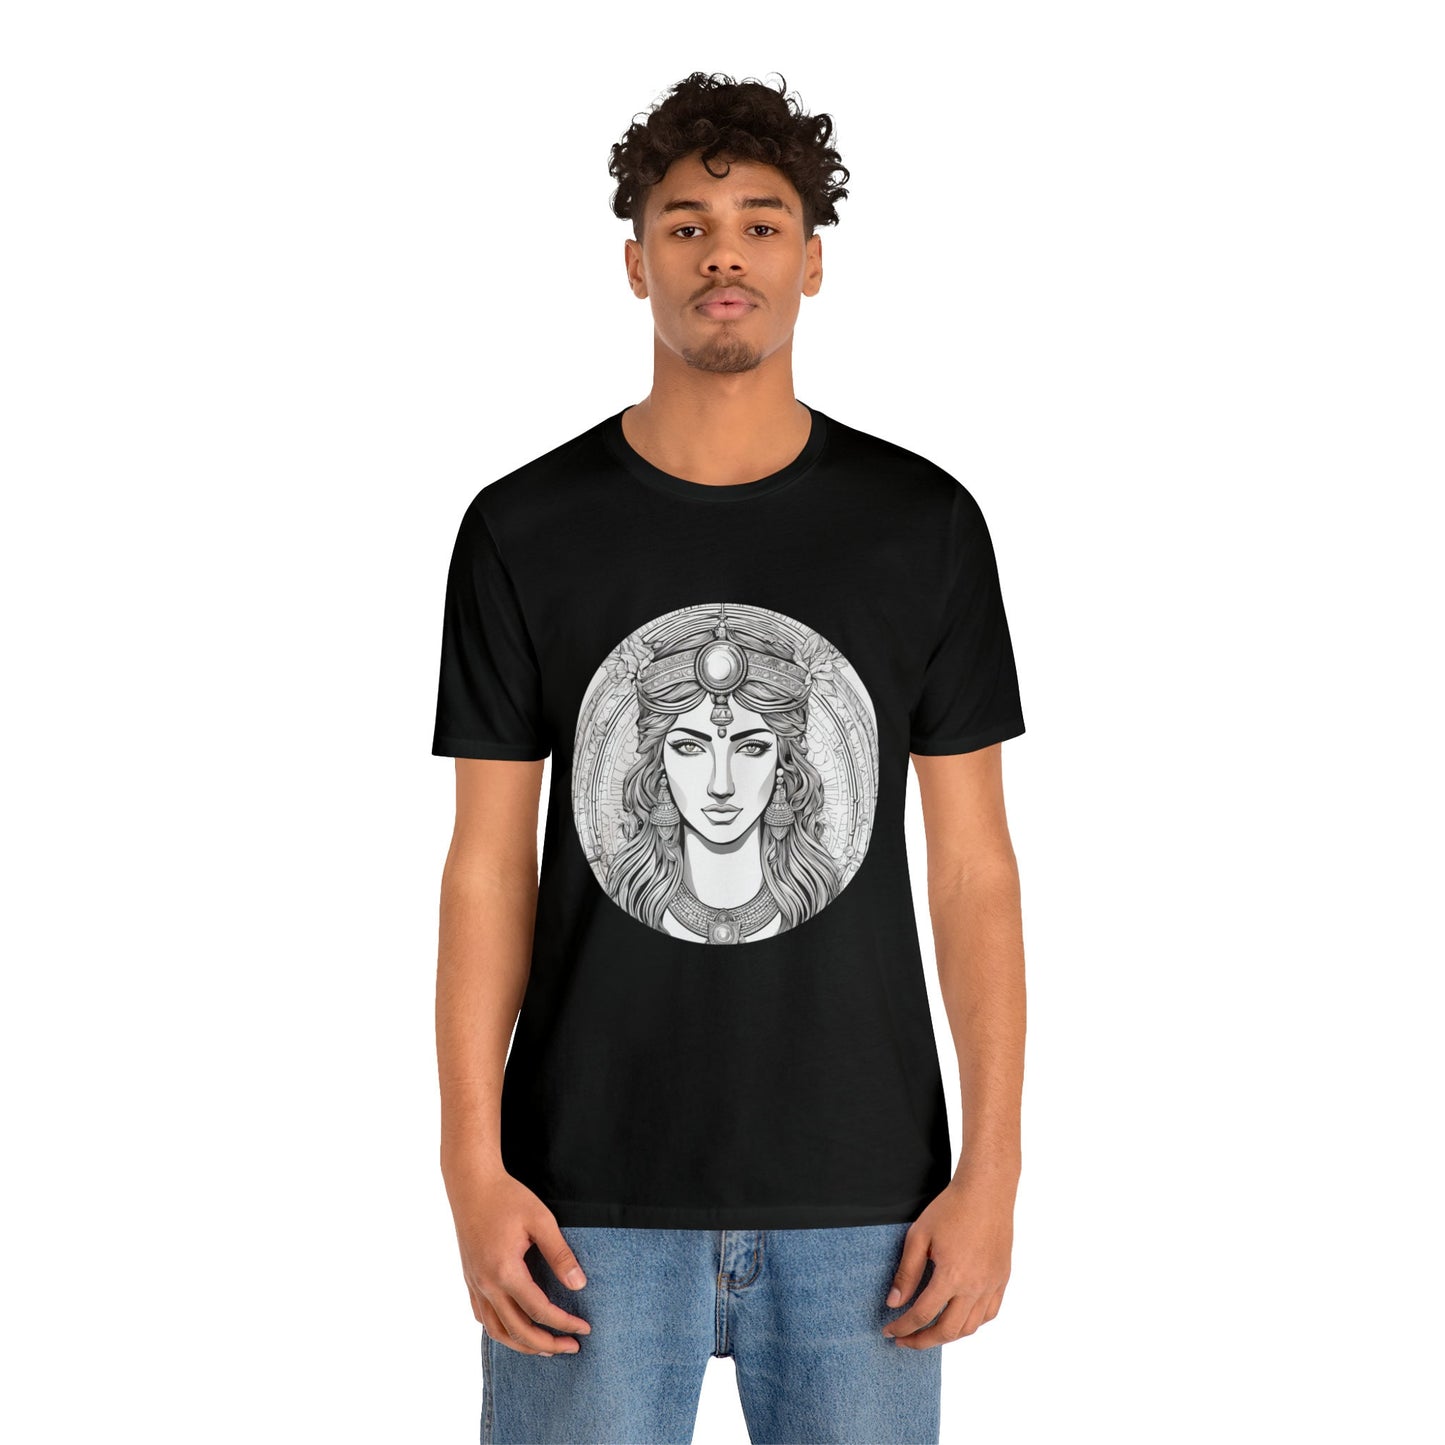 Artemis Tattoo Short Sleeve Tee Perfect Gift for Men and Women